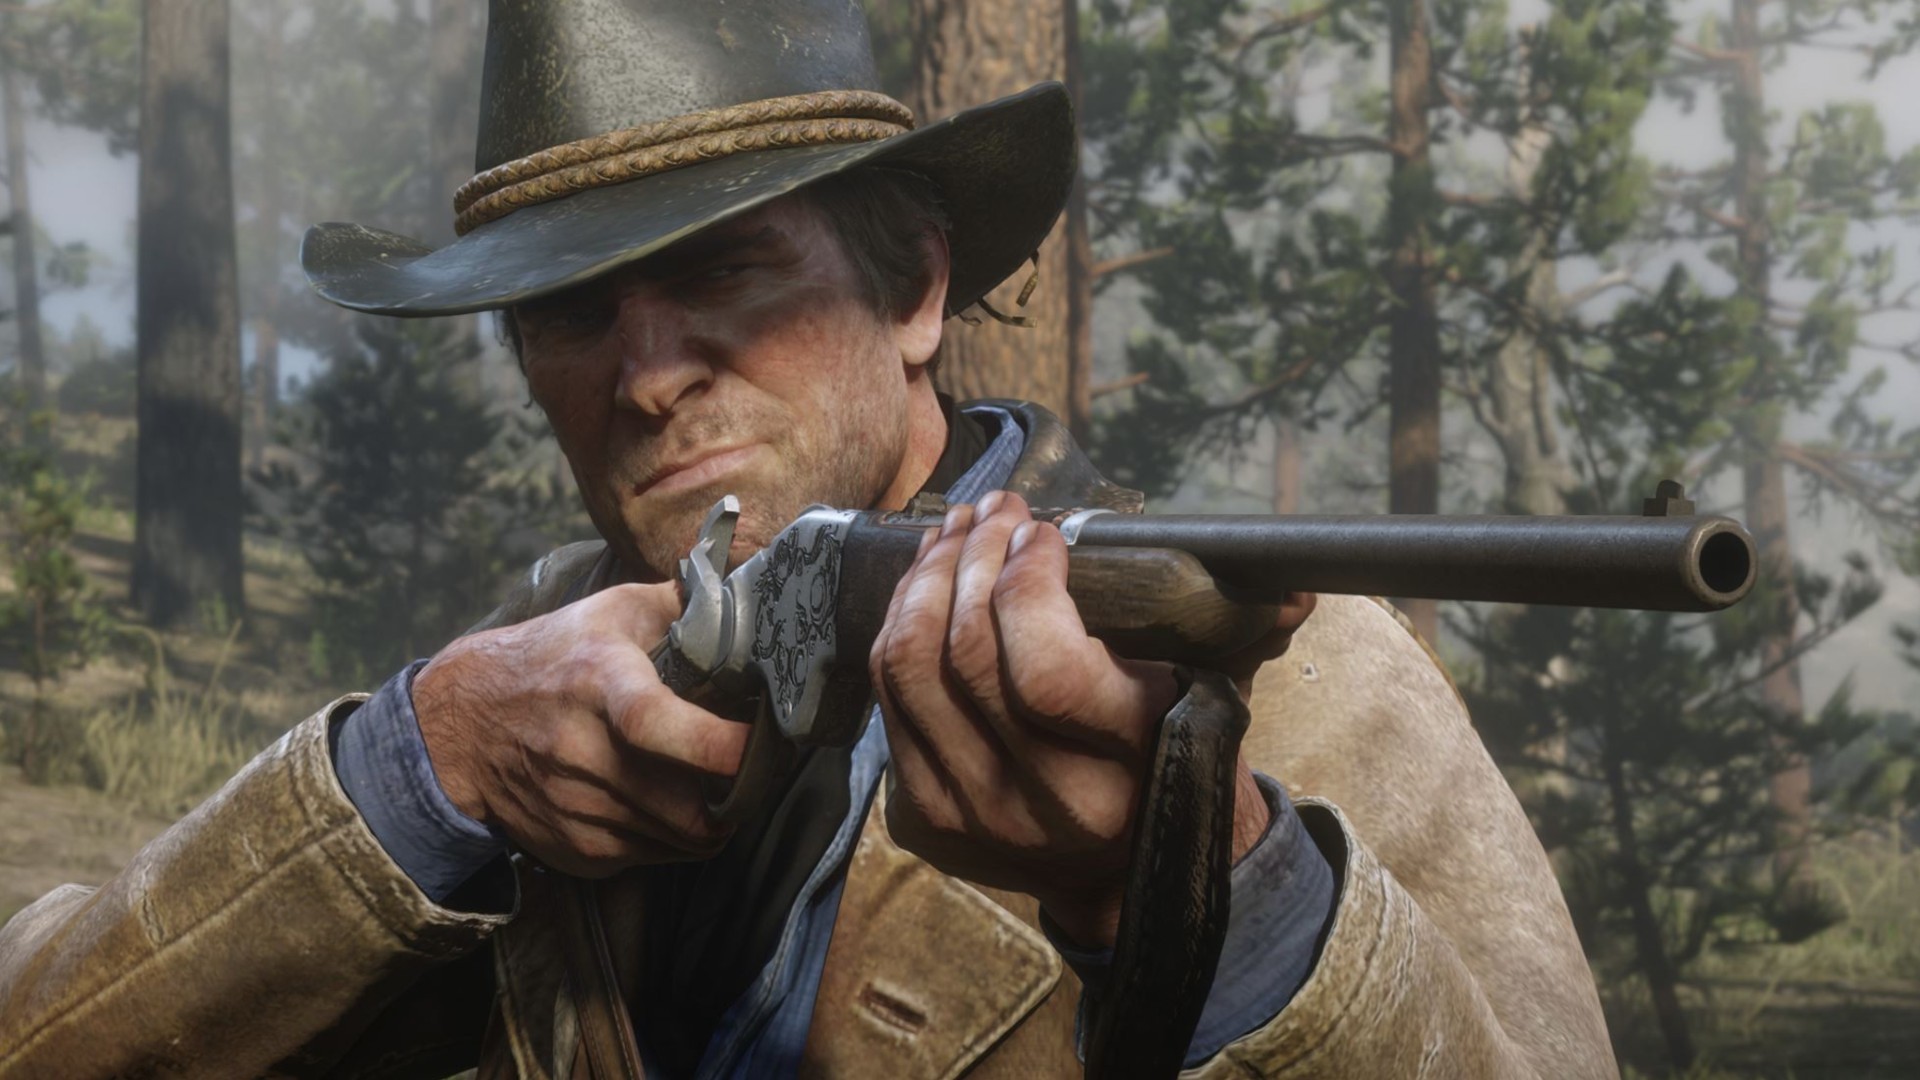 rysten marts kondensator Red Dead Redemption 2 weapons: locations of all rare weapons | PCGamesN